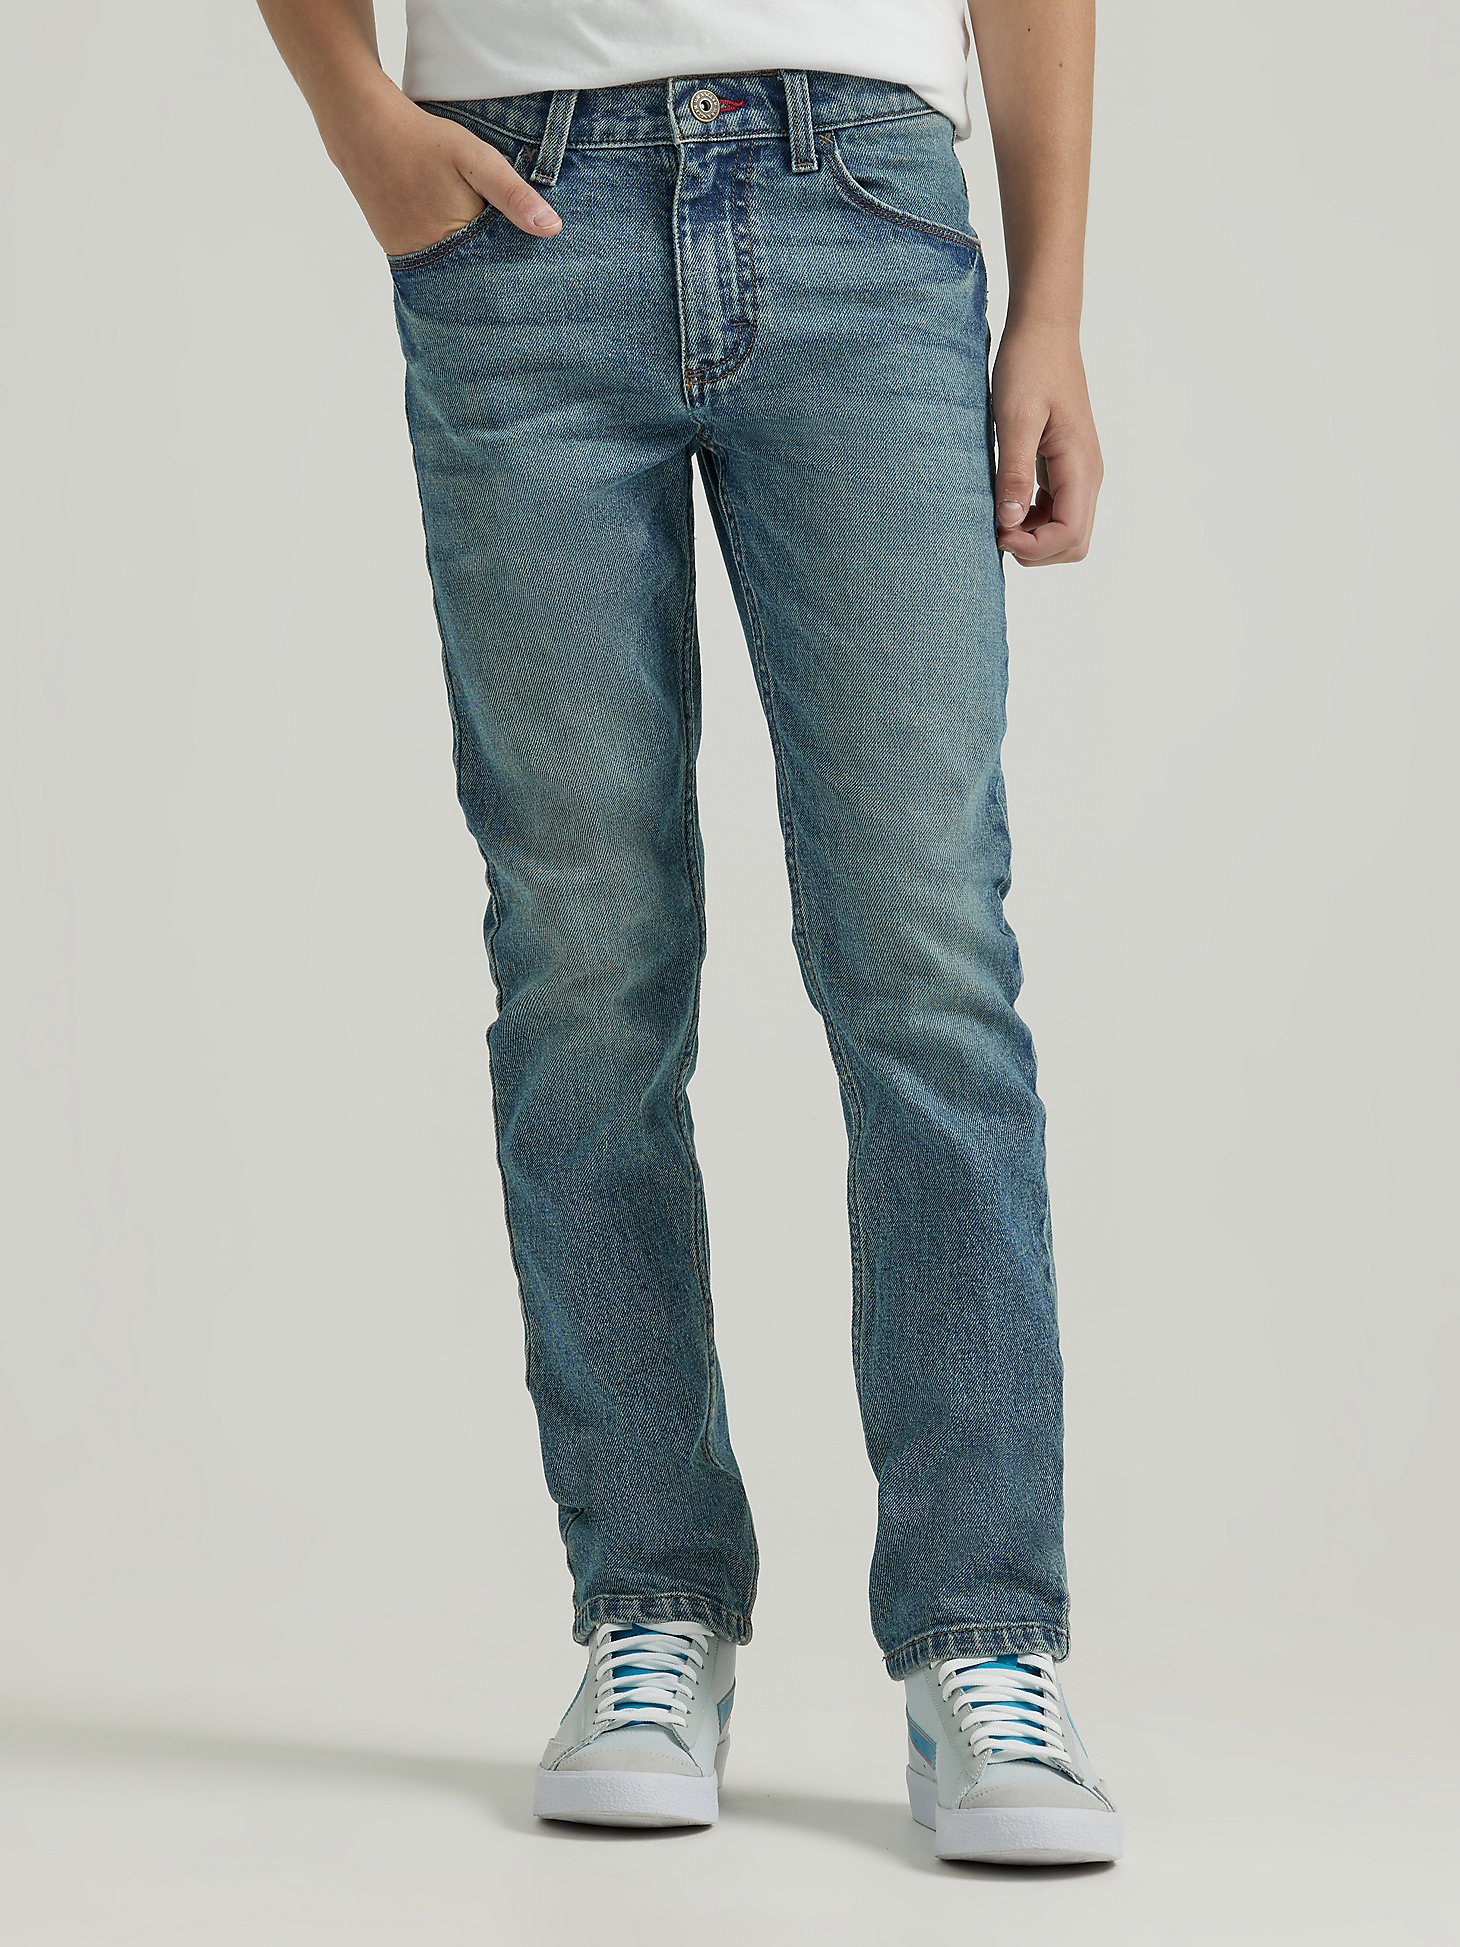 Boy's Indigood Slim Fit Jean (8-16) in Frontier main view